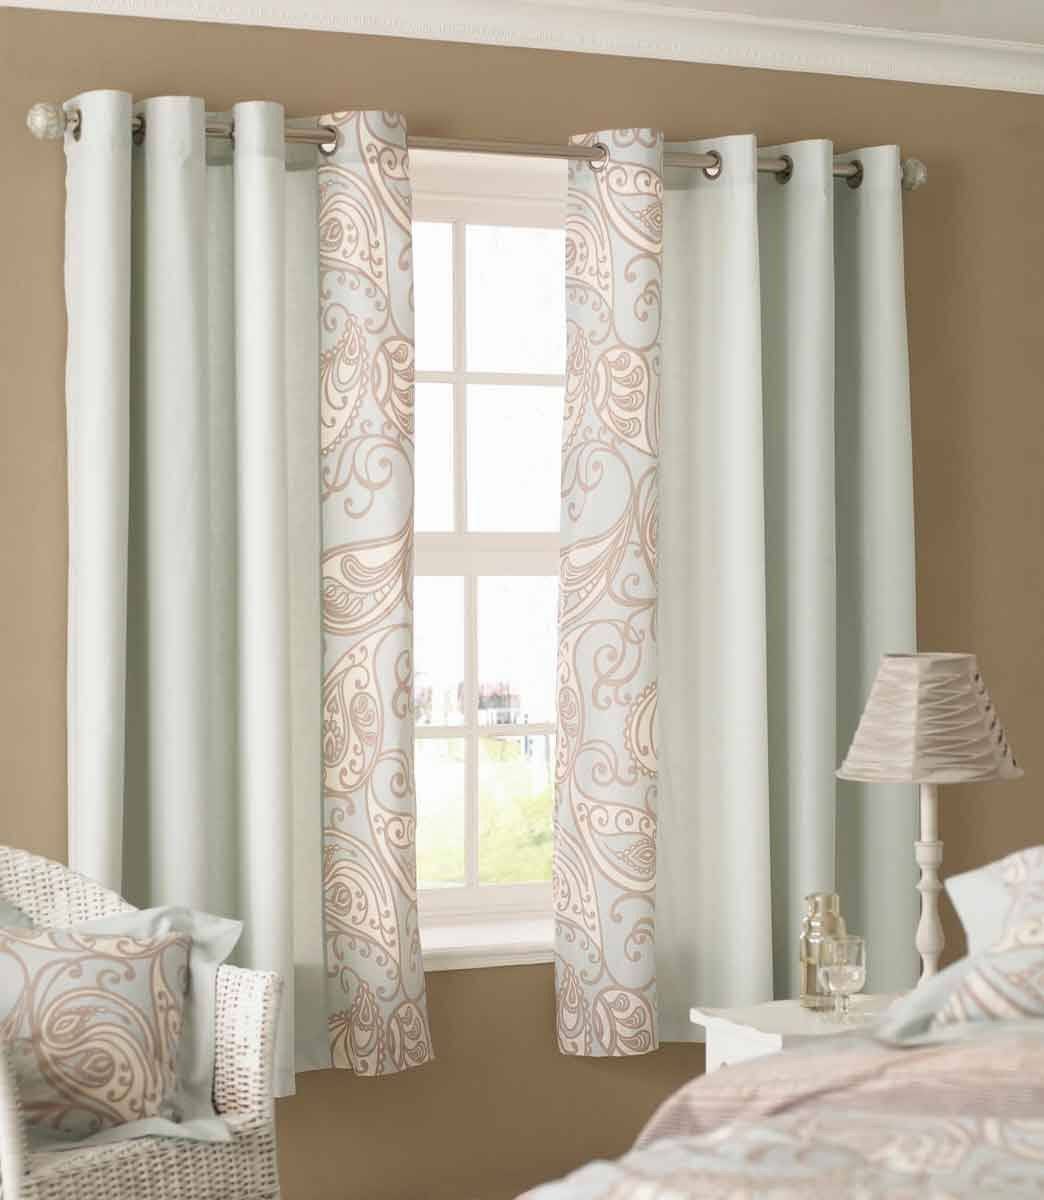 Living Room Curtains Ideas Best Of 25 Cool Living Room Curtain Ideas for Your Farmhouse Interior Design Inspirations